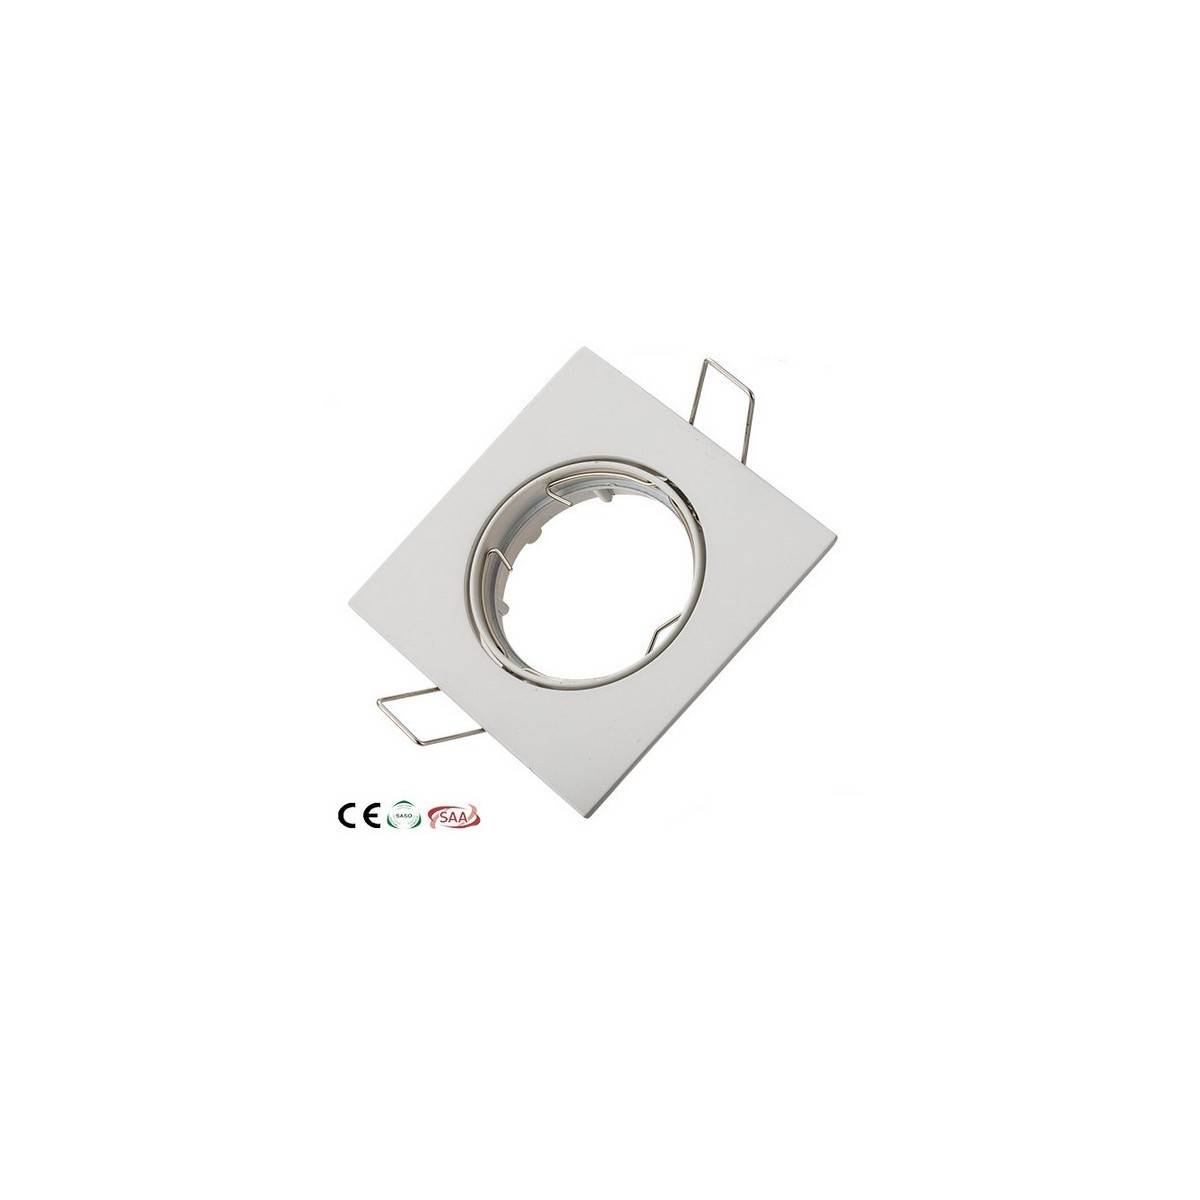 Square tilting recessed downlight ring for GU10 bulb